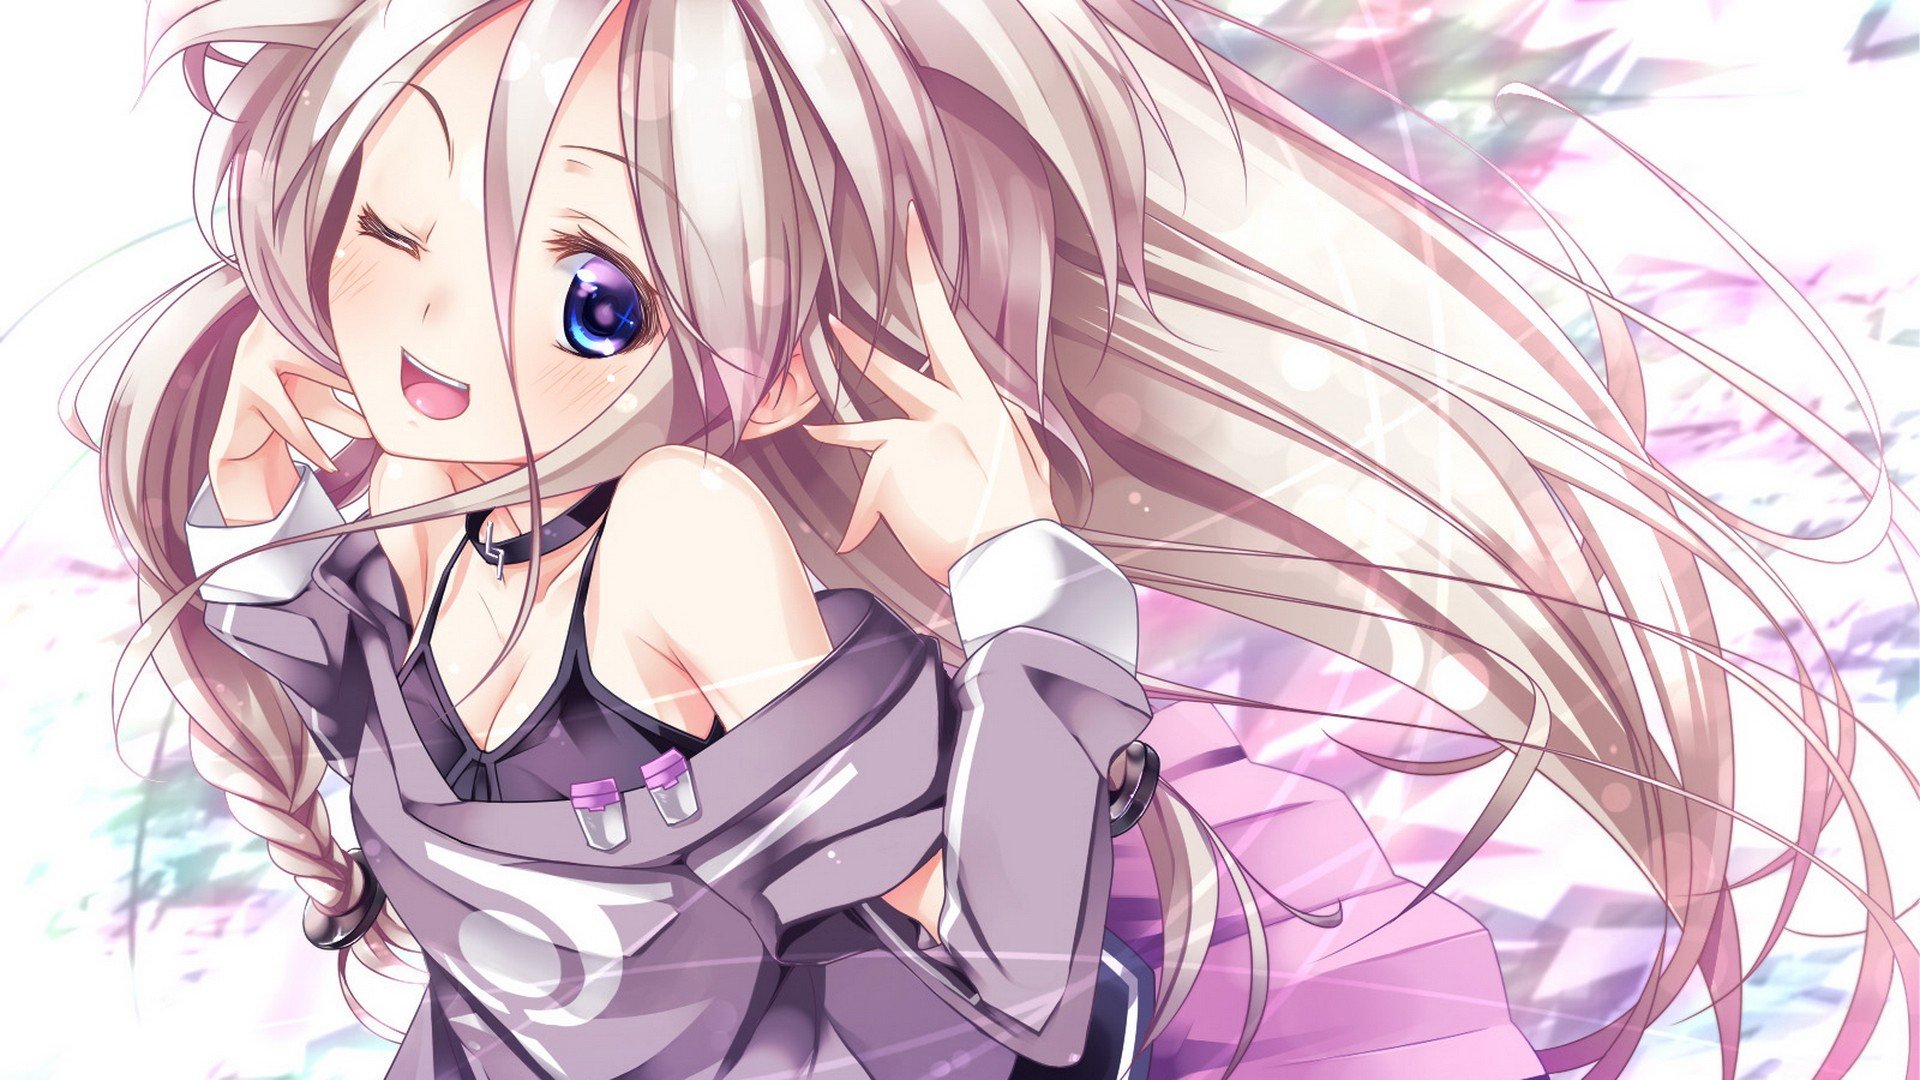 vocaloid, Dress, Skirts, Long, Hair, Pink, Hair, Open, Mouth, Purple, Eyes, Simple, Background, Anime, Girls, Upscaled Wallpaper